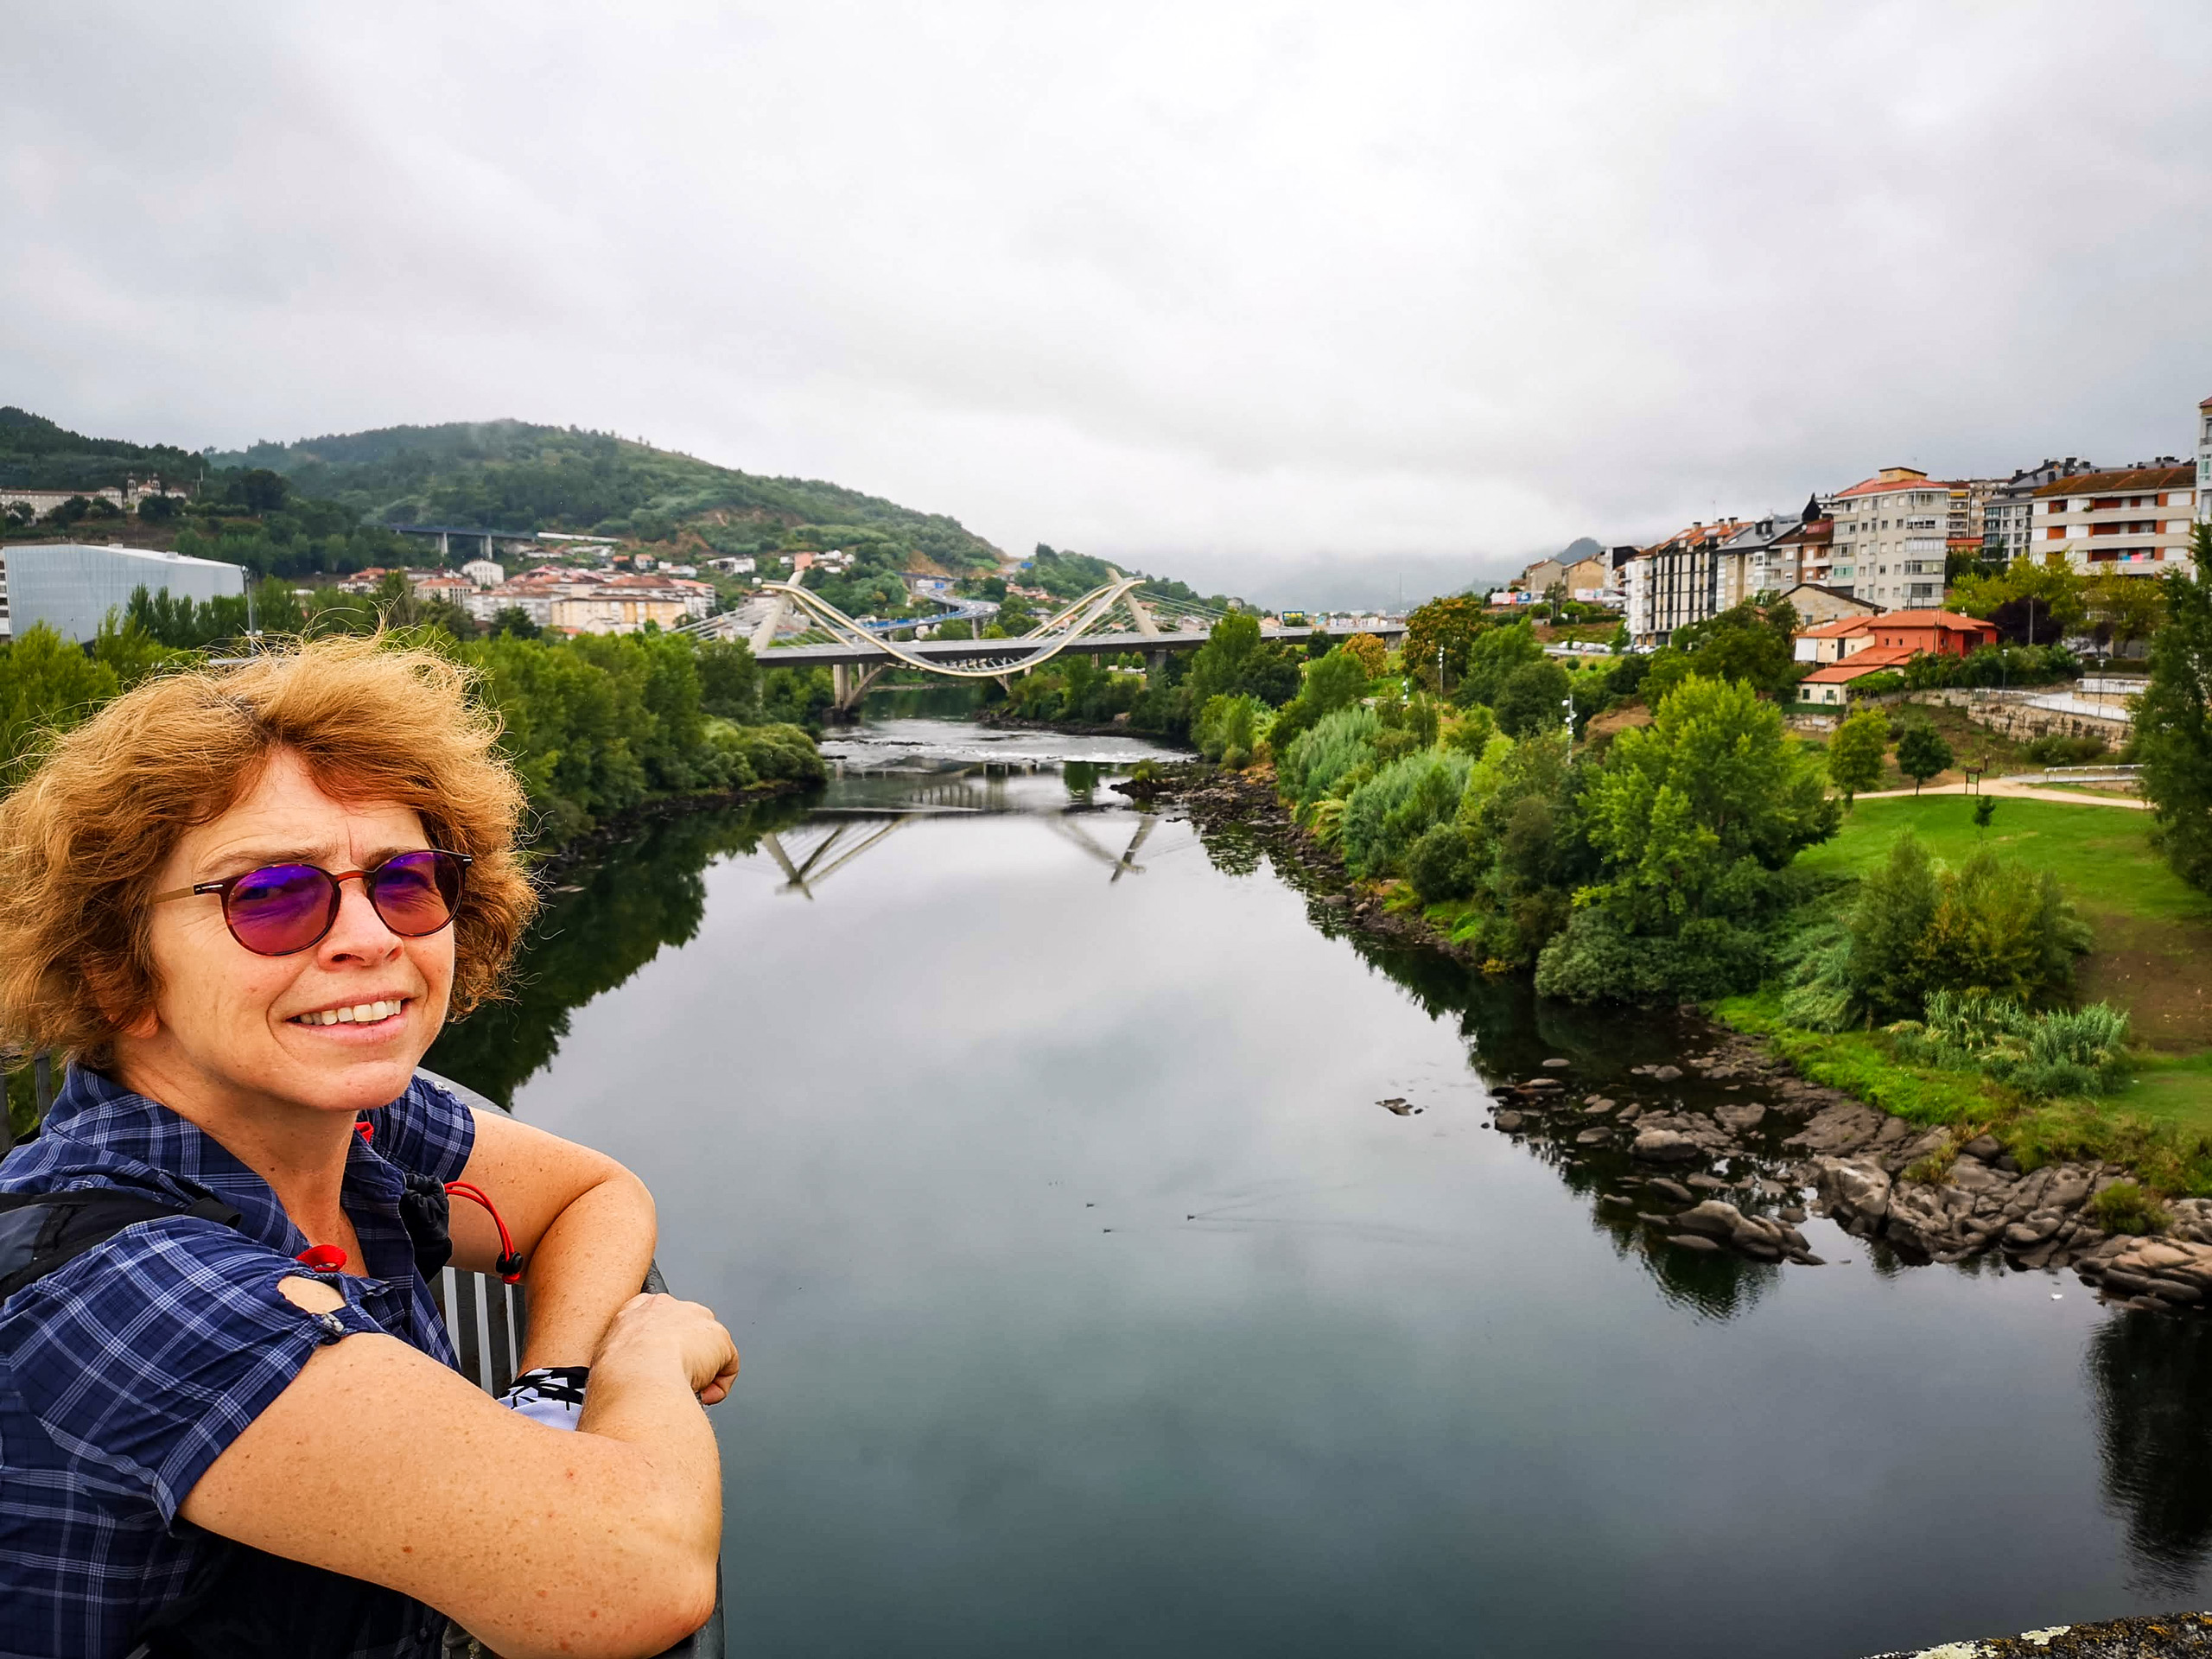 Standing on bridge over clam river arcitectural bridge city hills in the background Camino Sanabres Spain